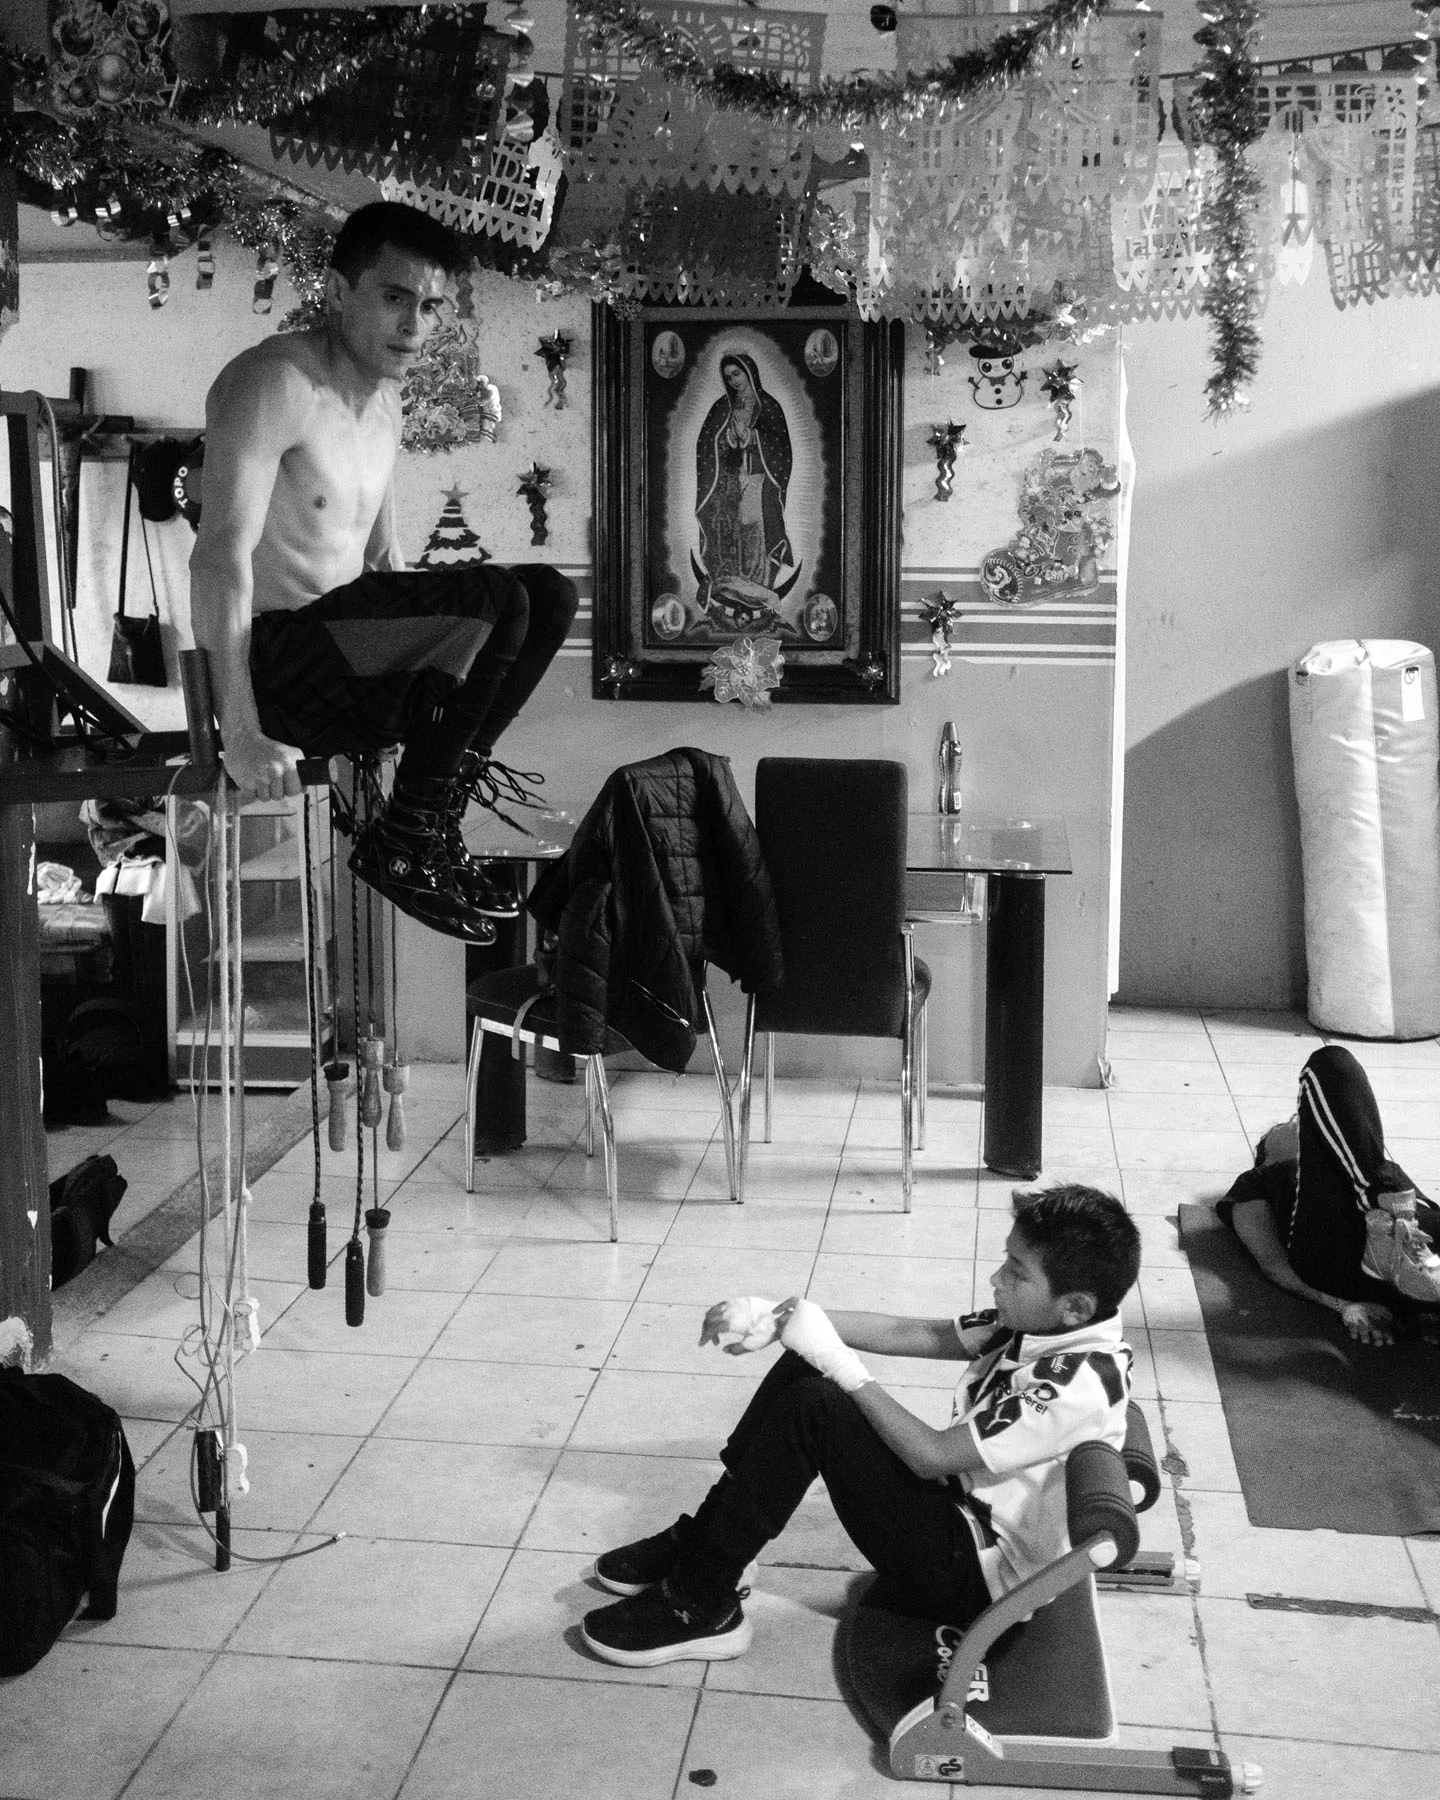 A black-and-white photograph of two boxers training with religious sculptures and the image of the Virgen de Guadalupe in the background. 
